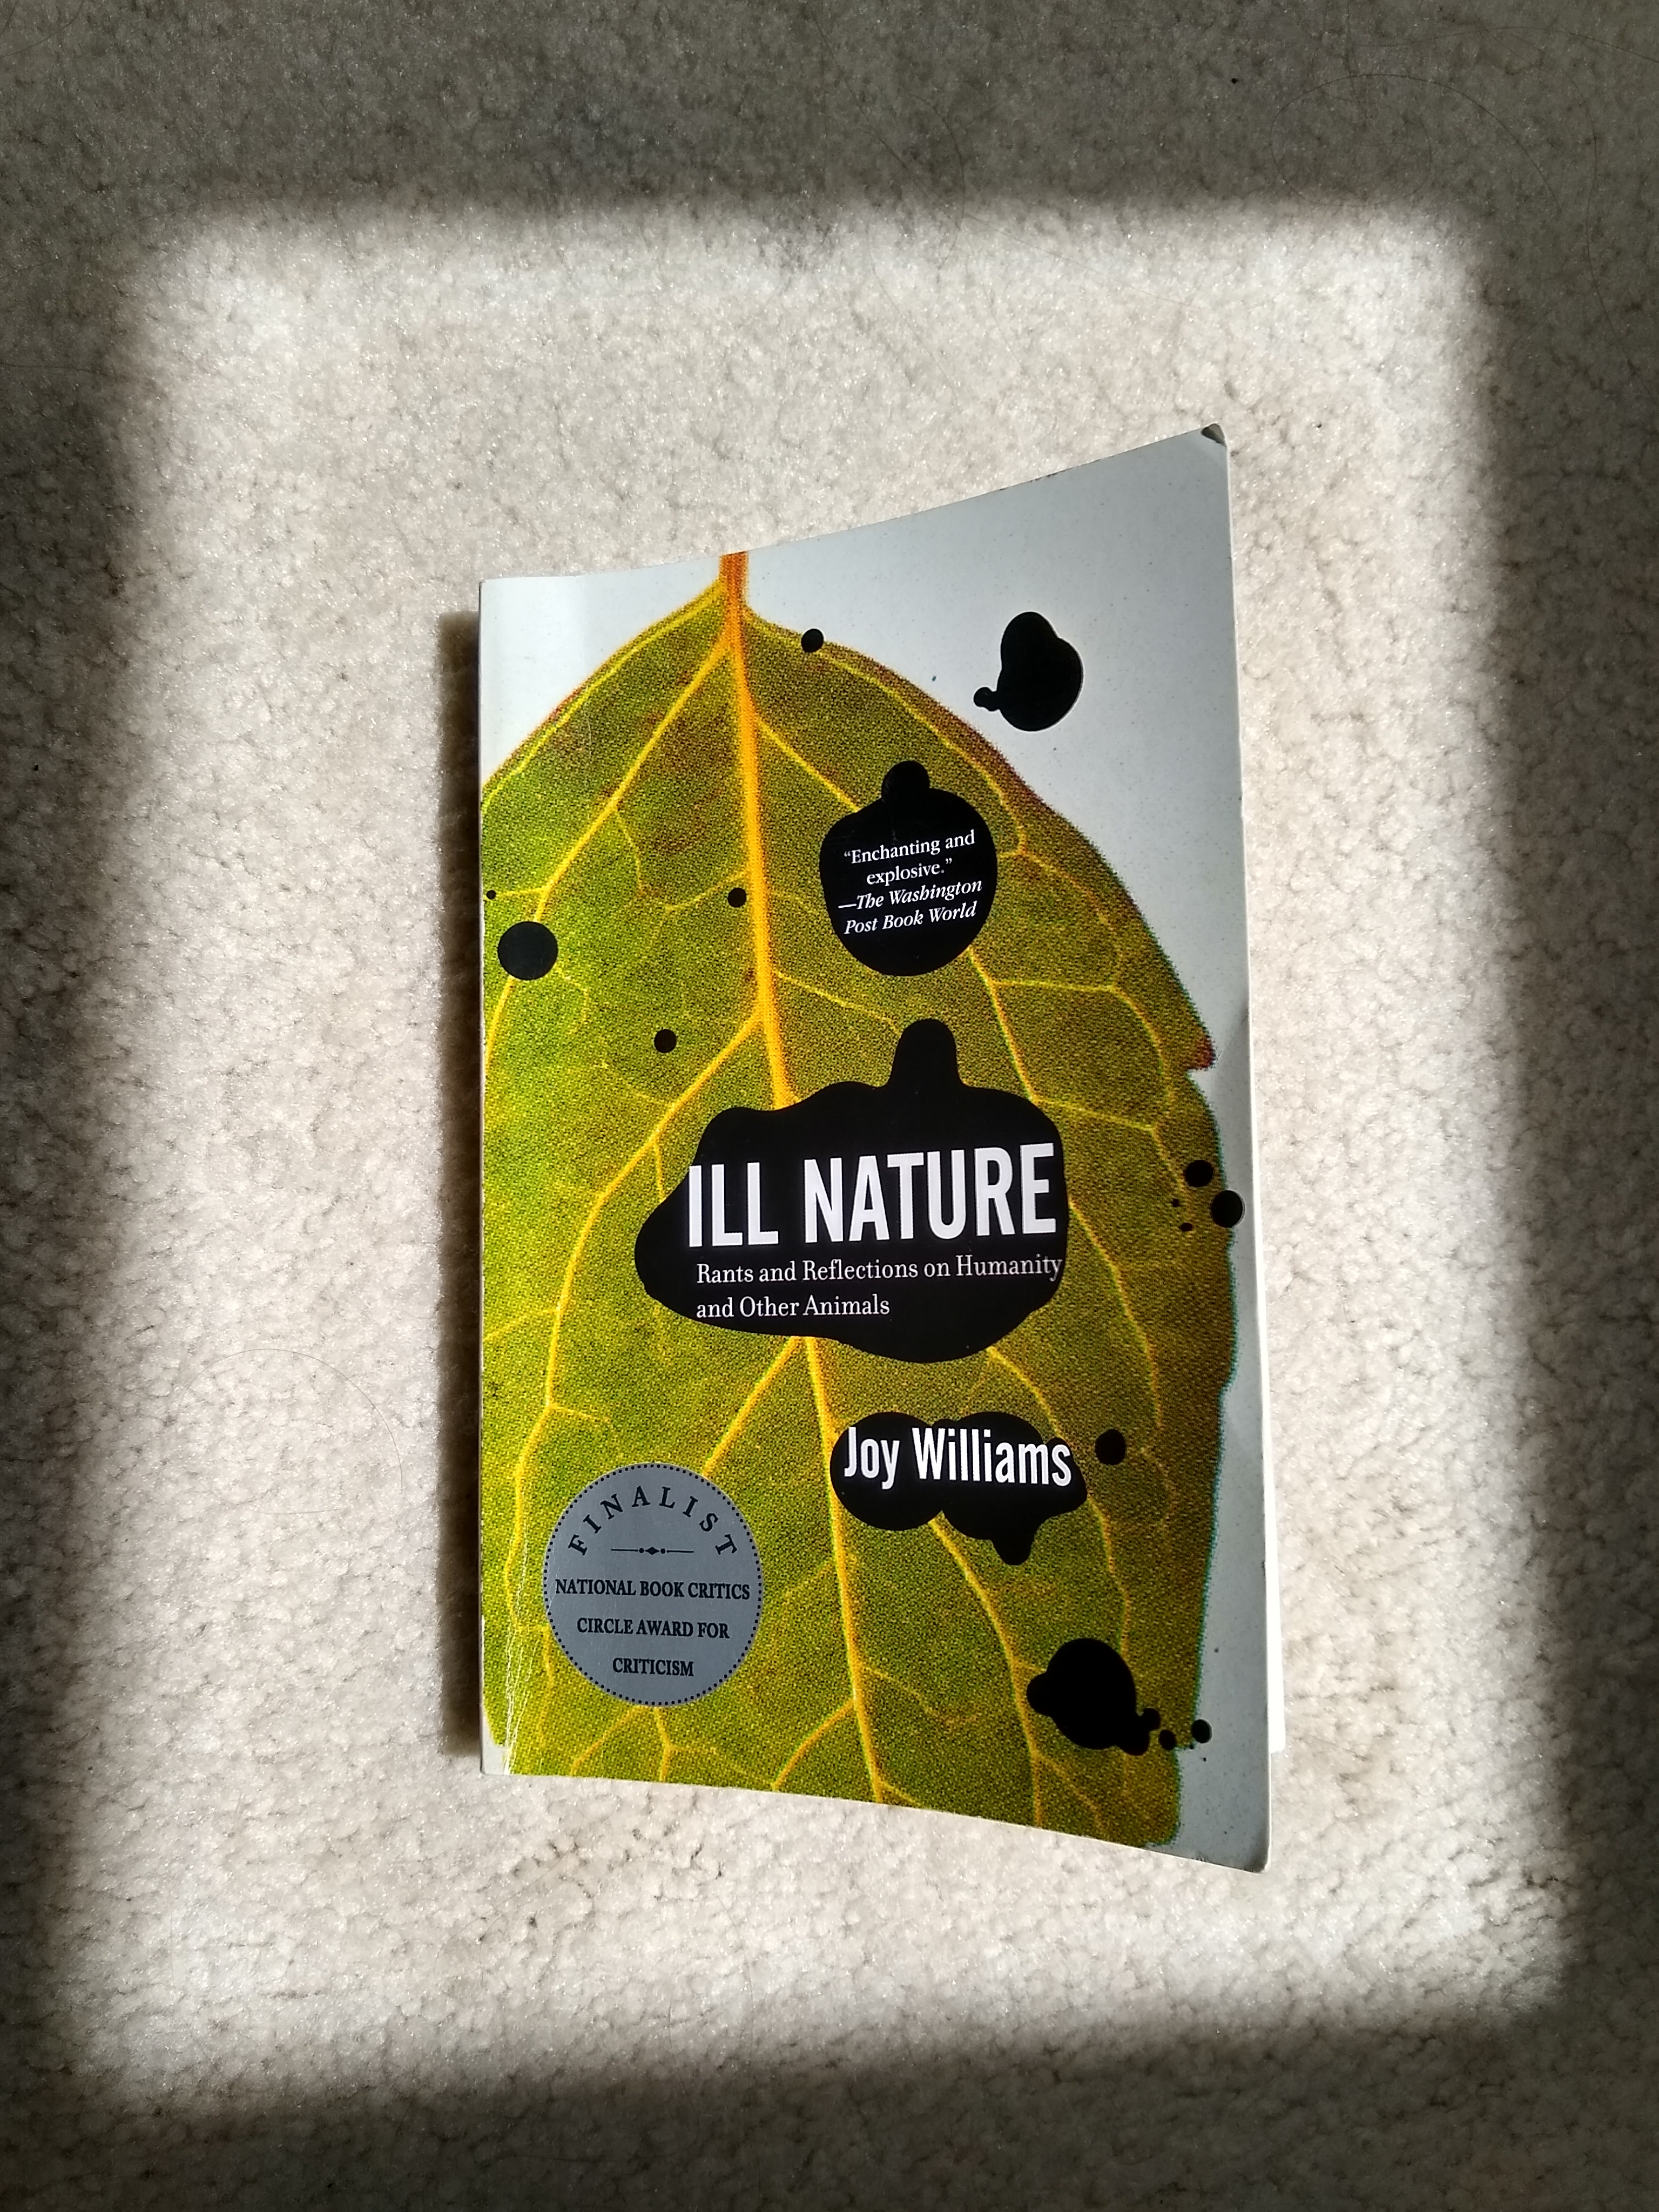 Photo of Ill Nature book by Joy Williams